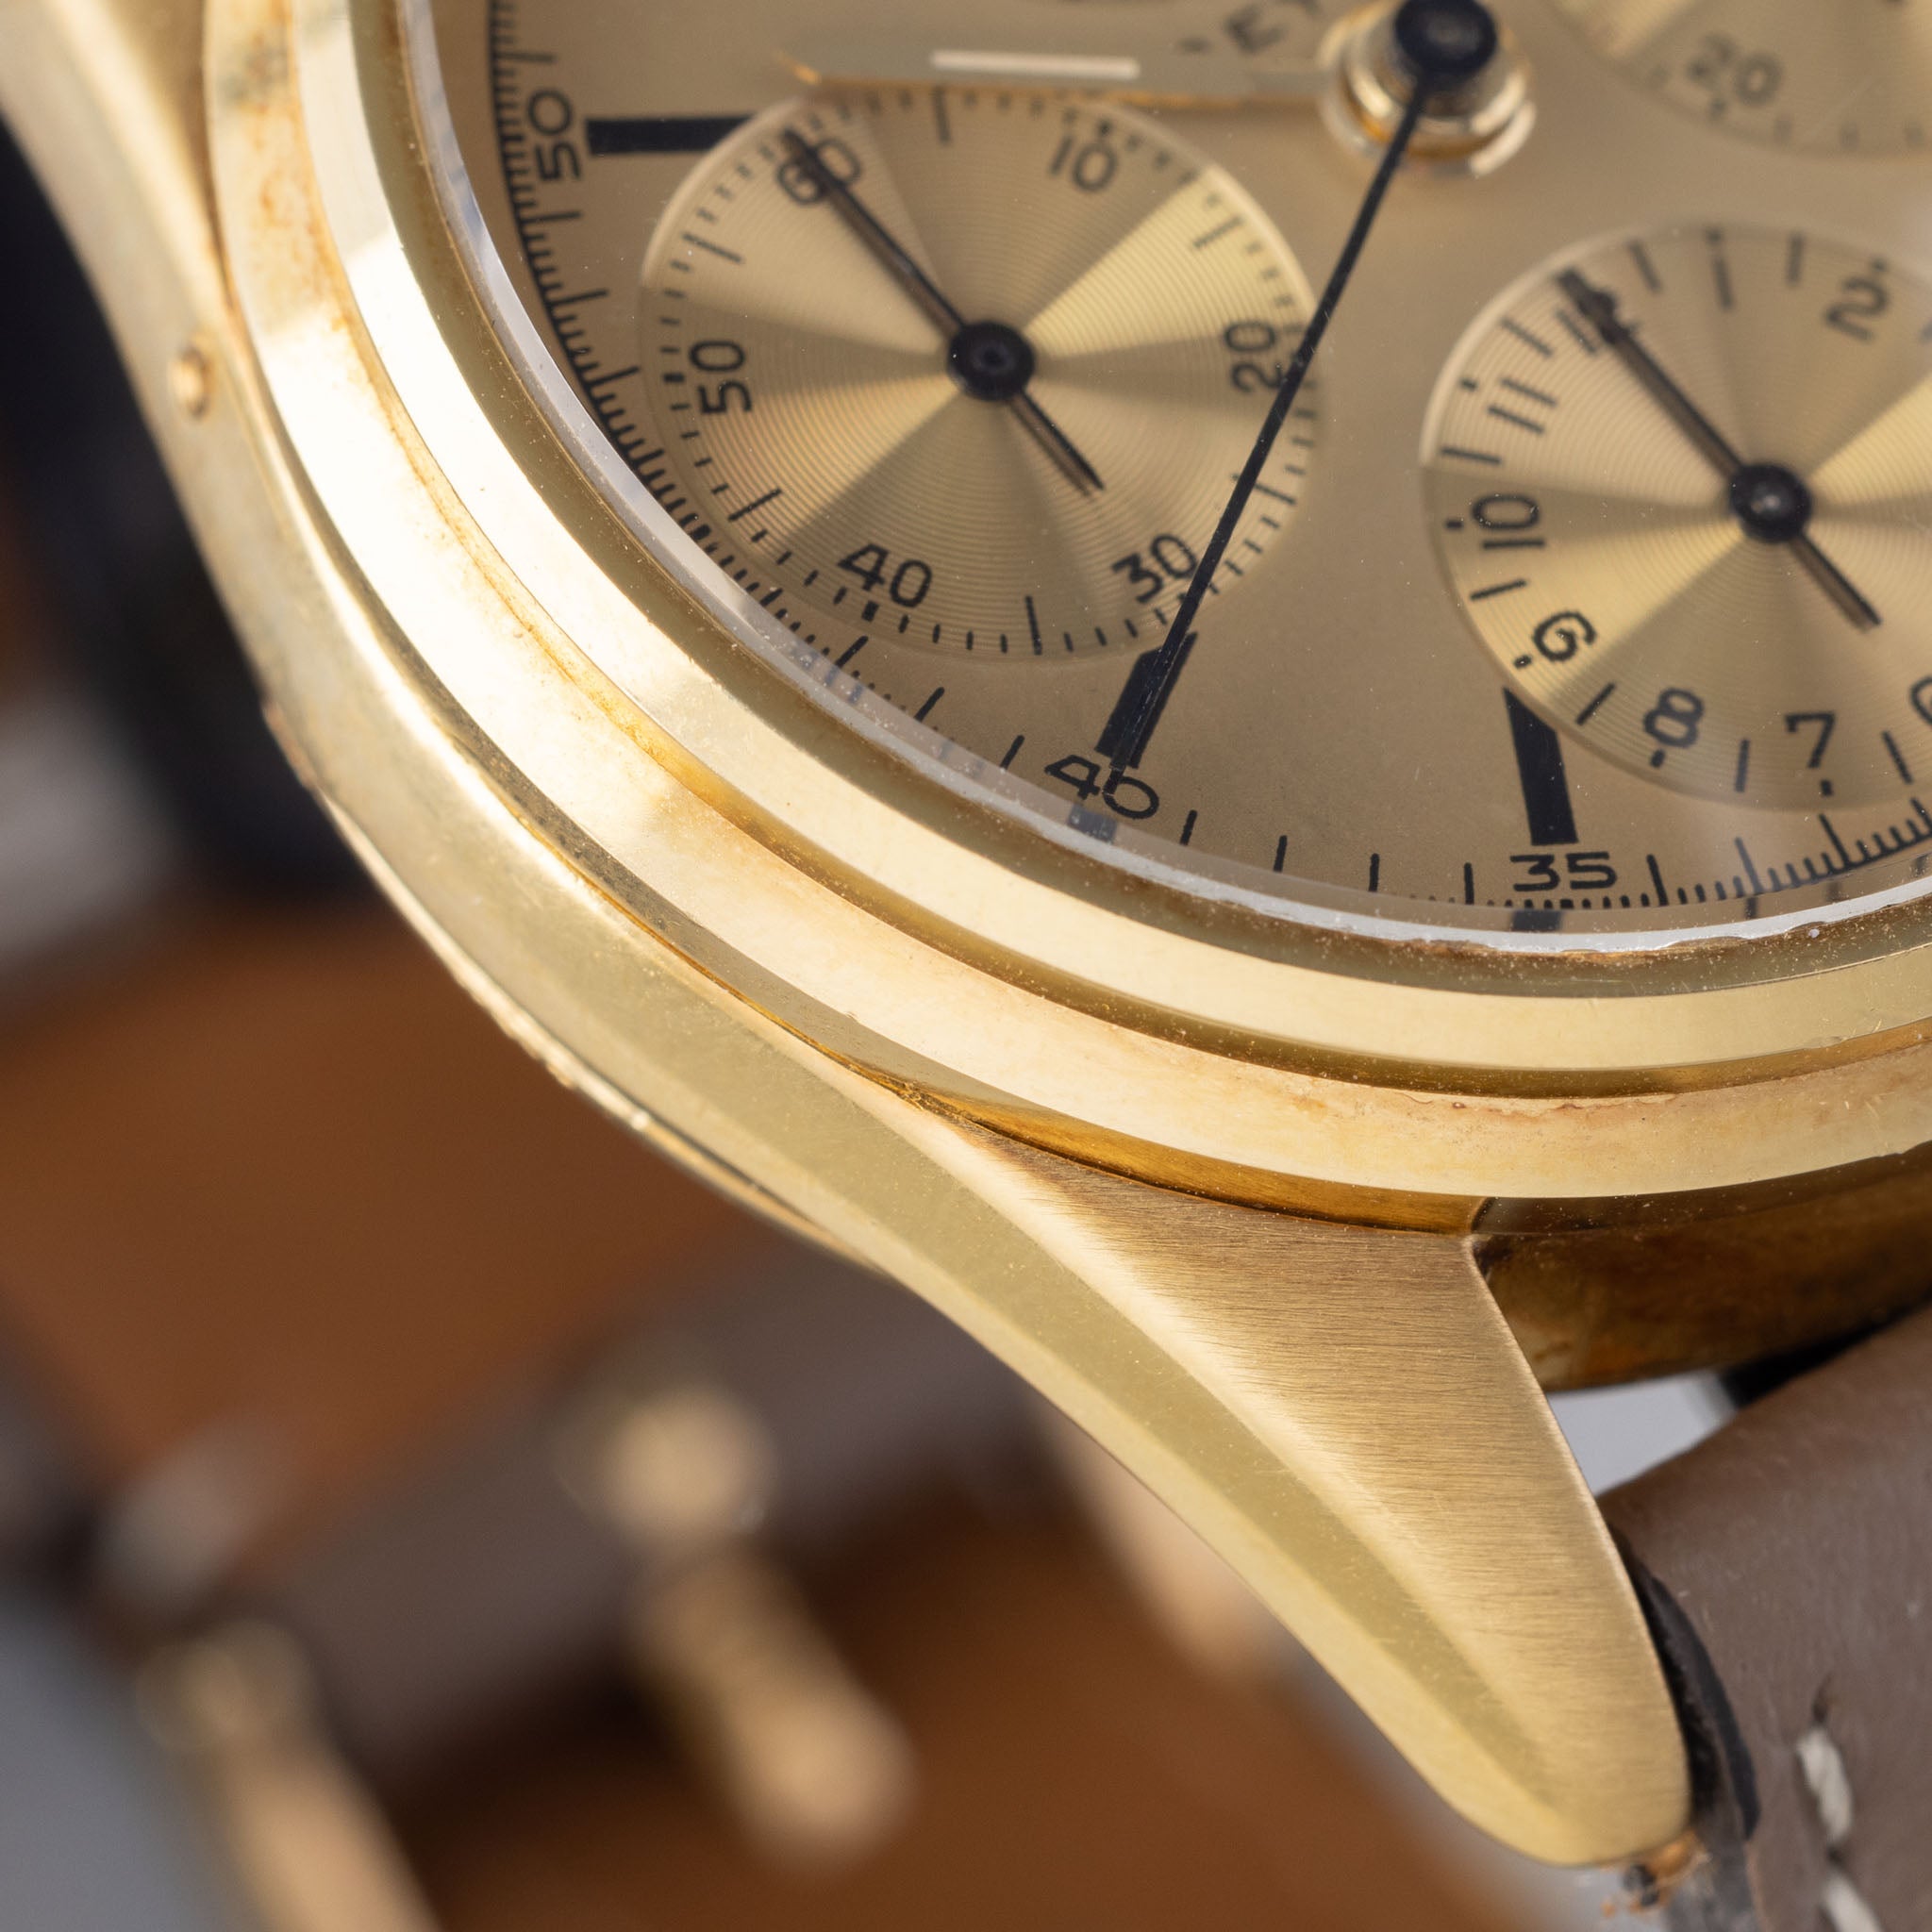 The Beyer Moonphase Rattrapante Split Second Chronograph